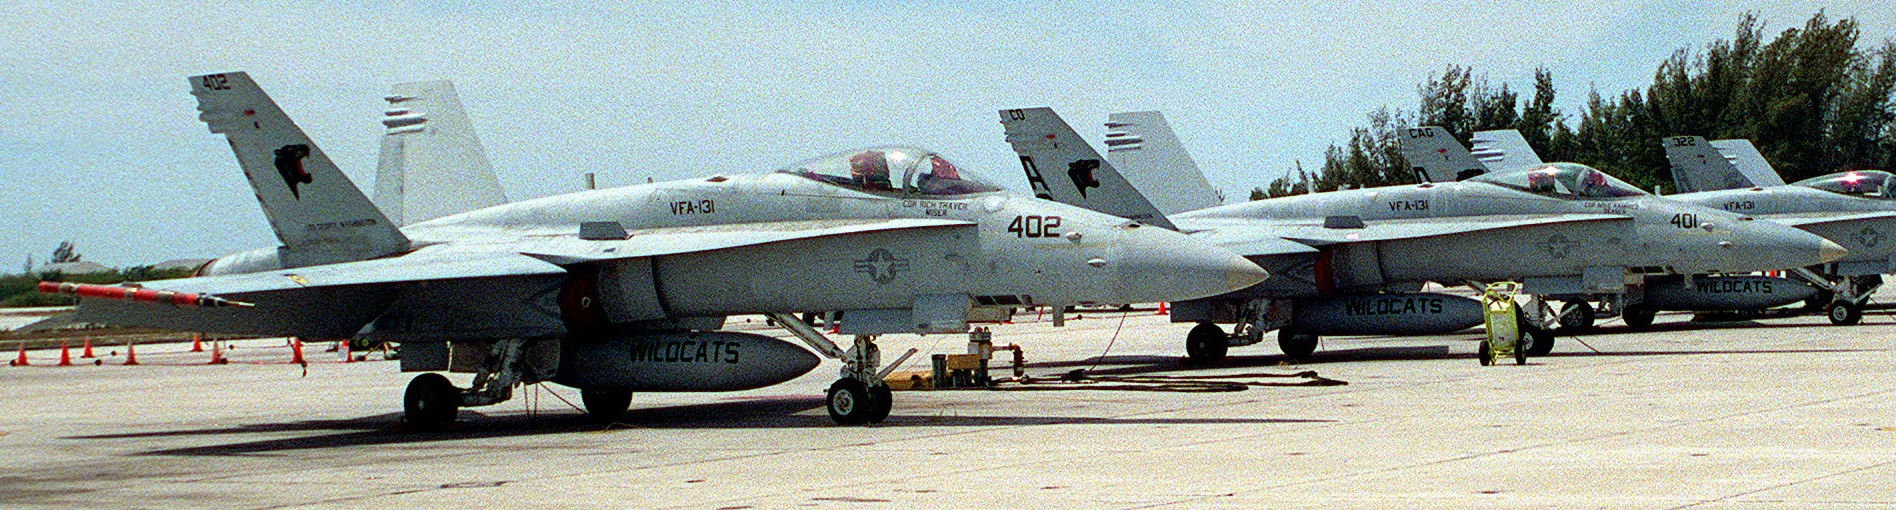 vfa-131 wildcats strike fighter squadron f/a-18c hornet nas key west florida 1993 118